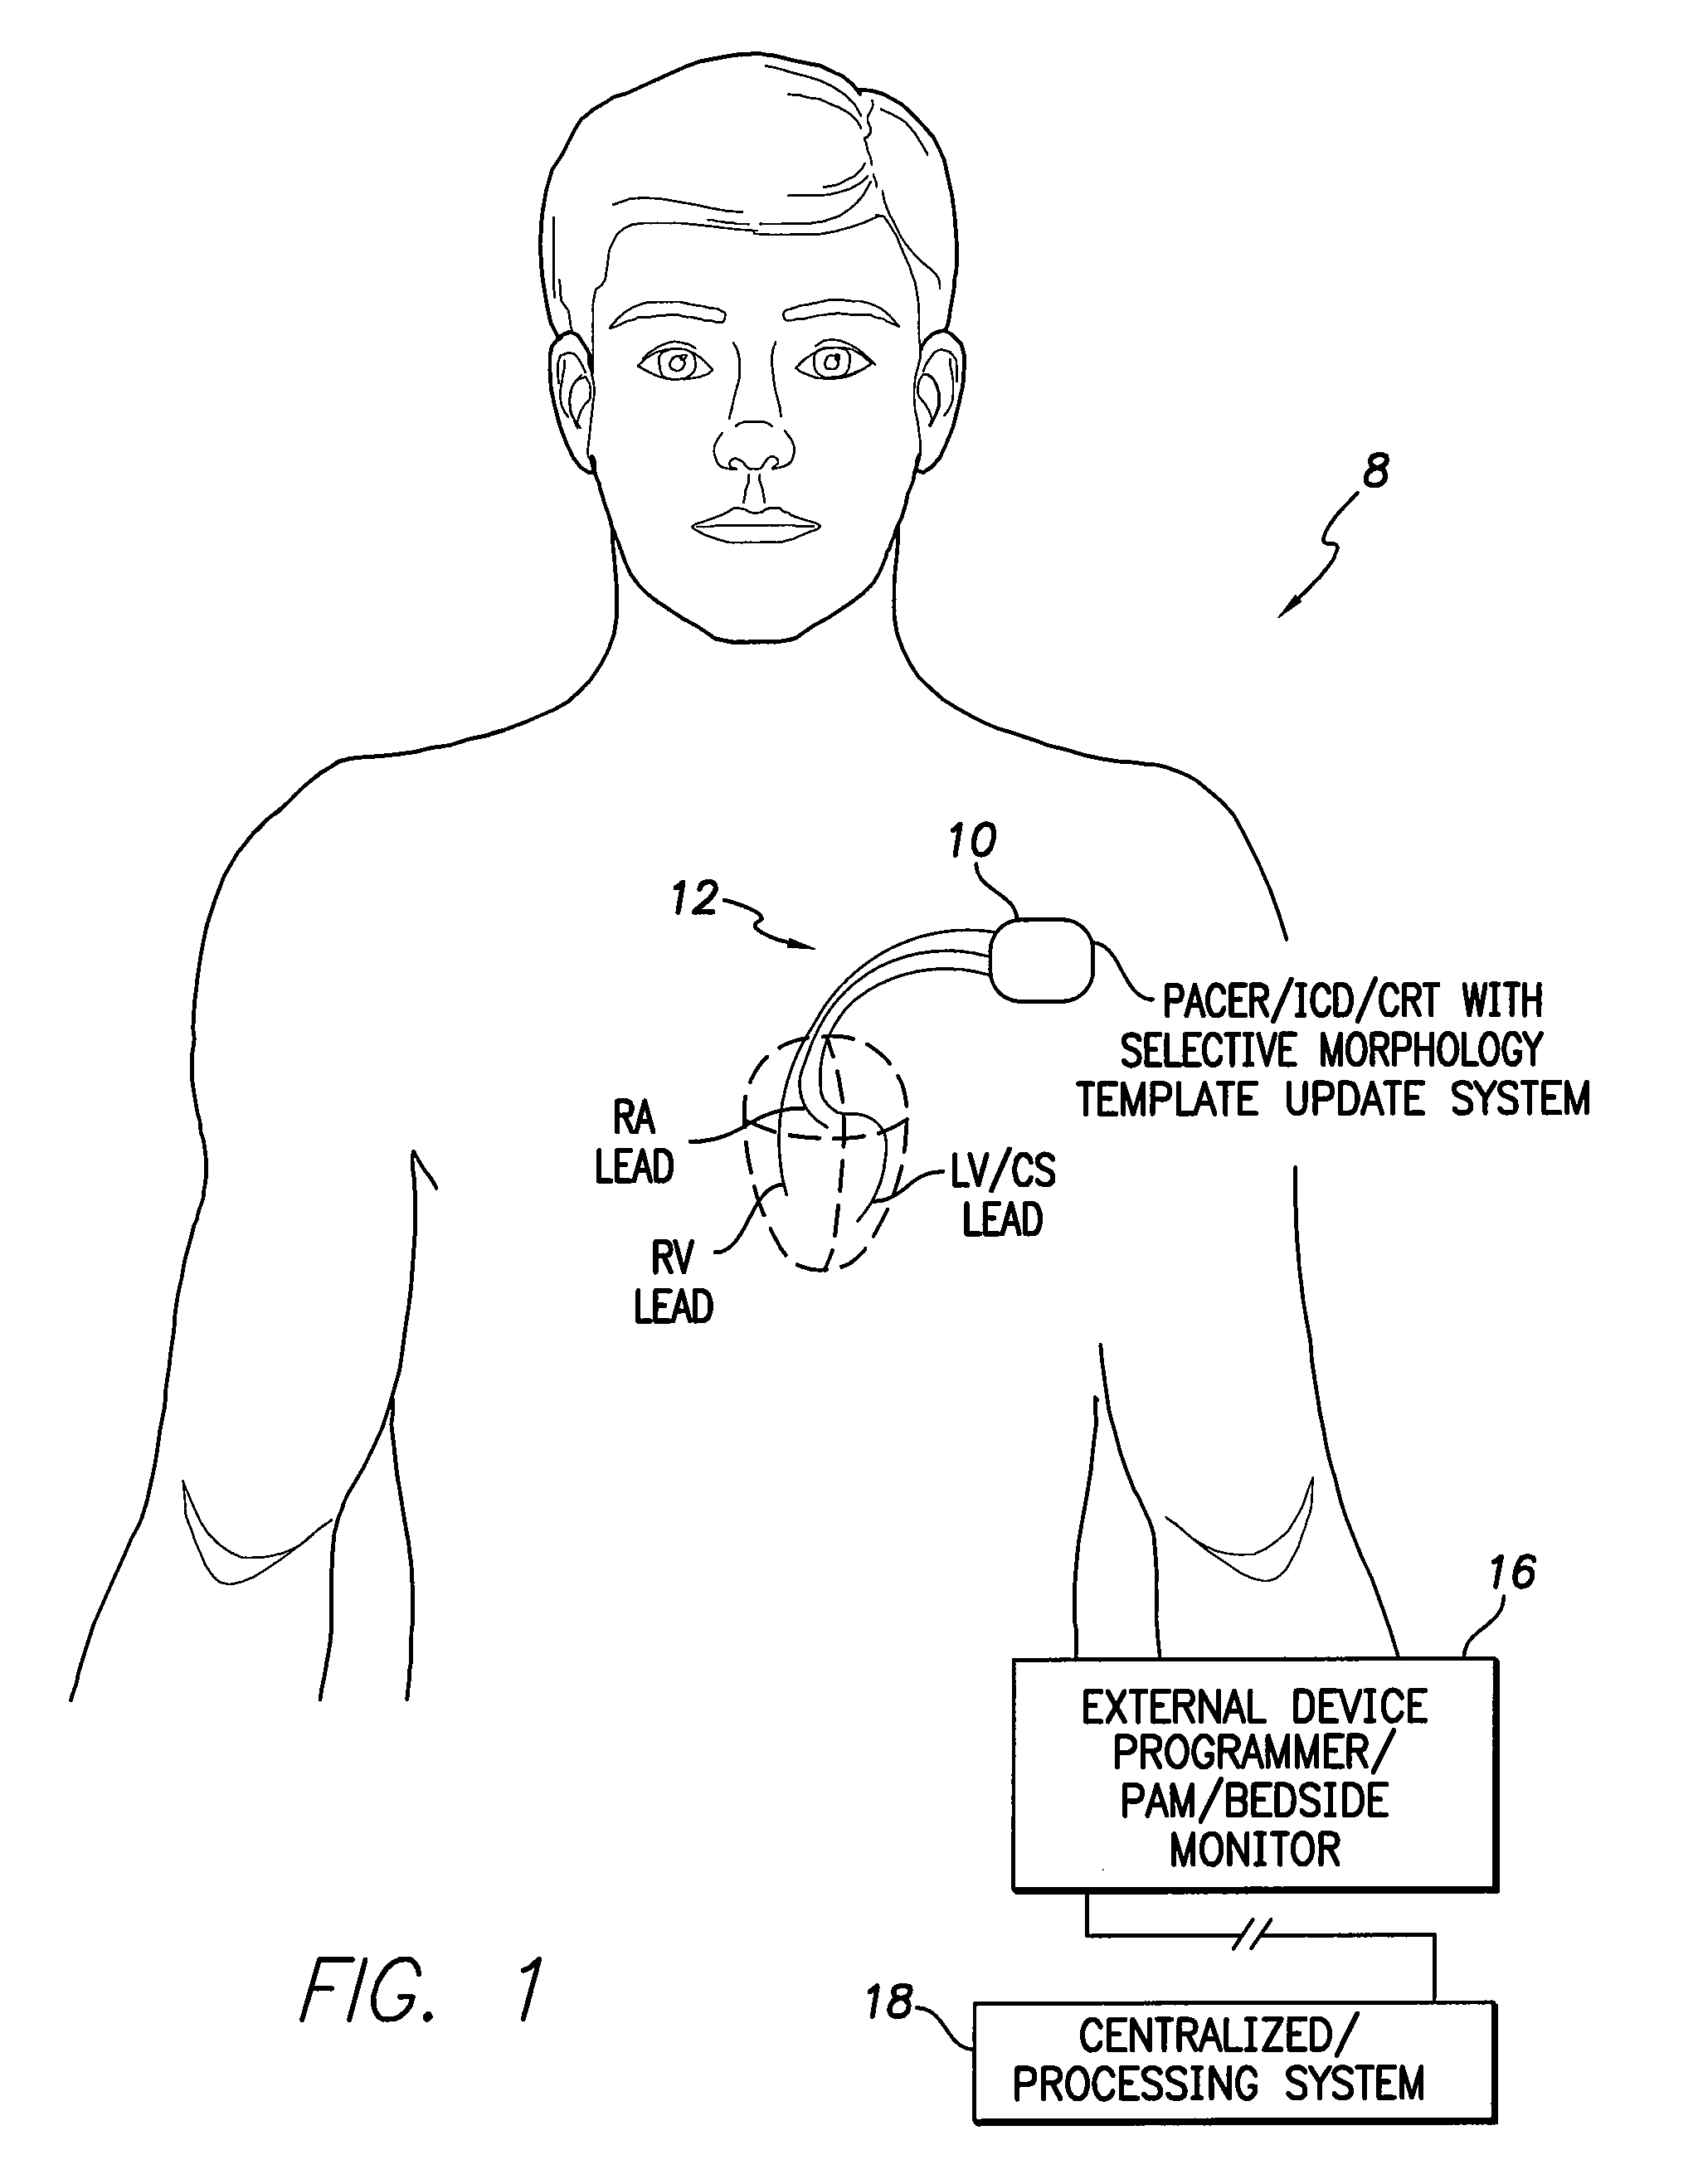 Systems and methods for selectively updating cardiac morphology discrimination templates for use with implantable medical devices